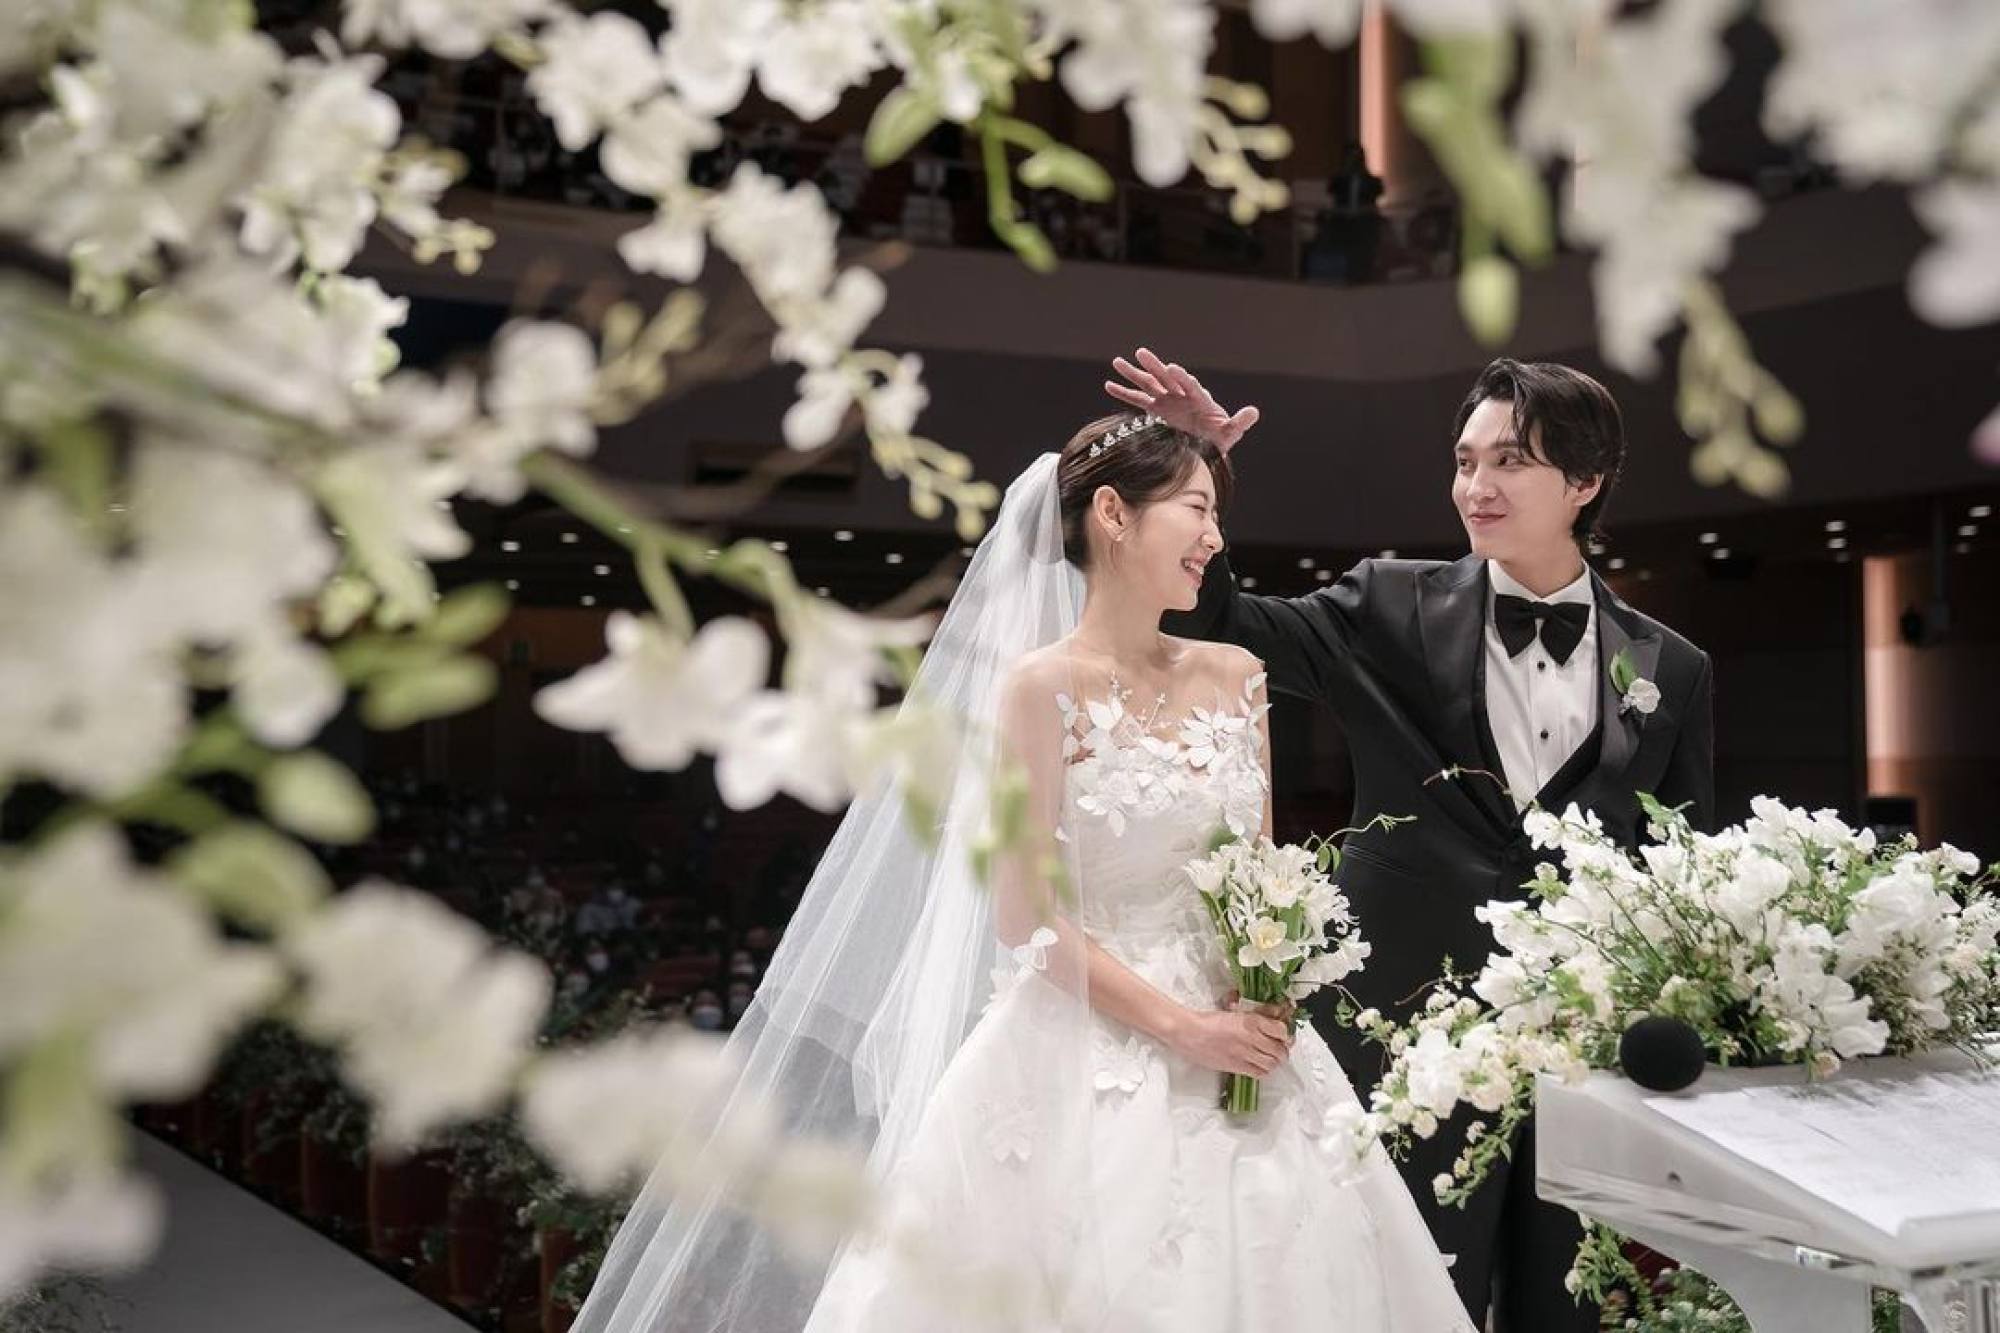 Park Shin-hye and Choi Tae-joon got married in 2021. @ssinz7/Instagram